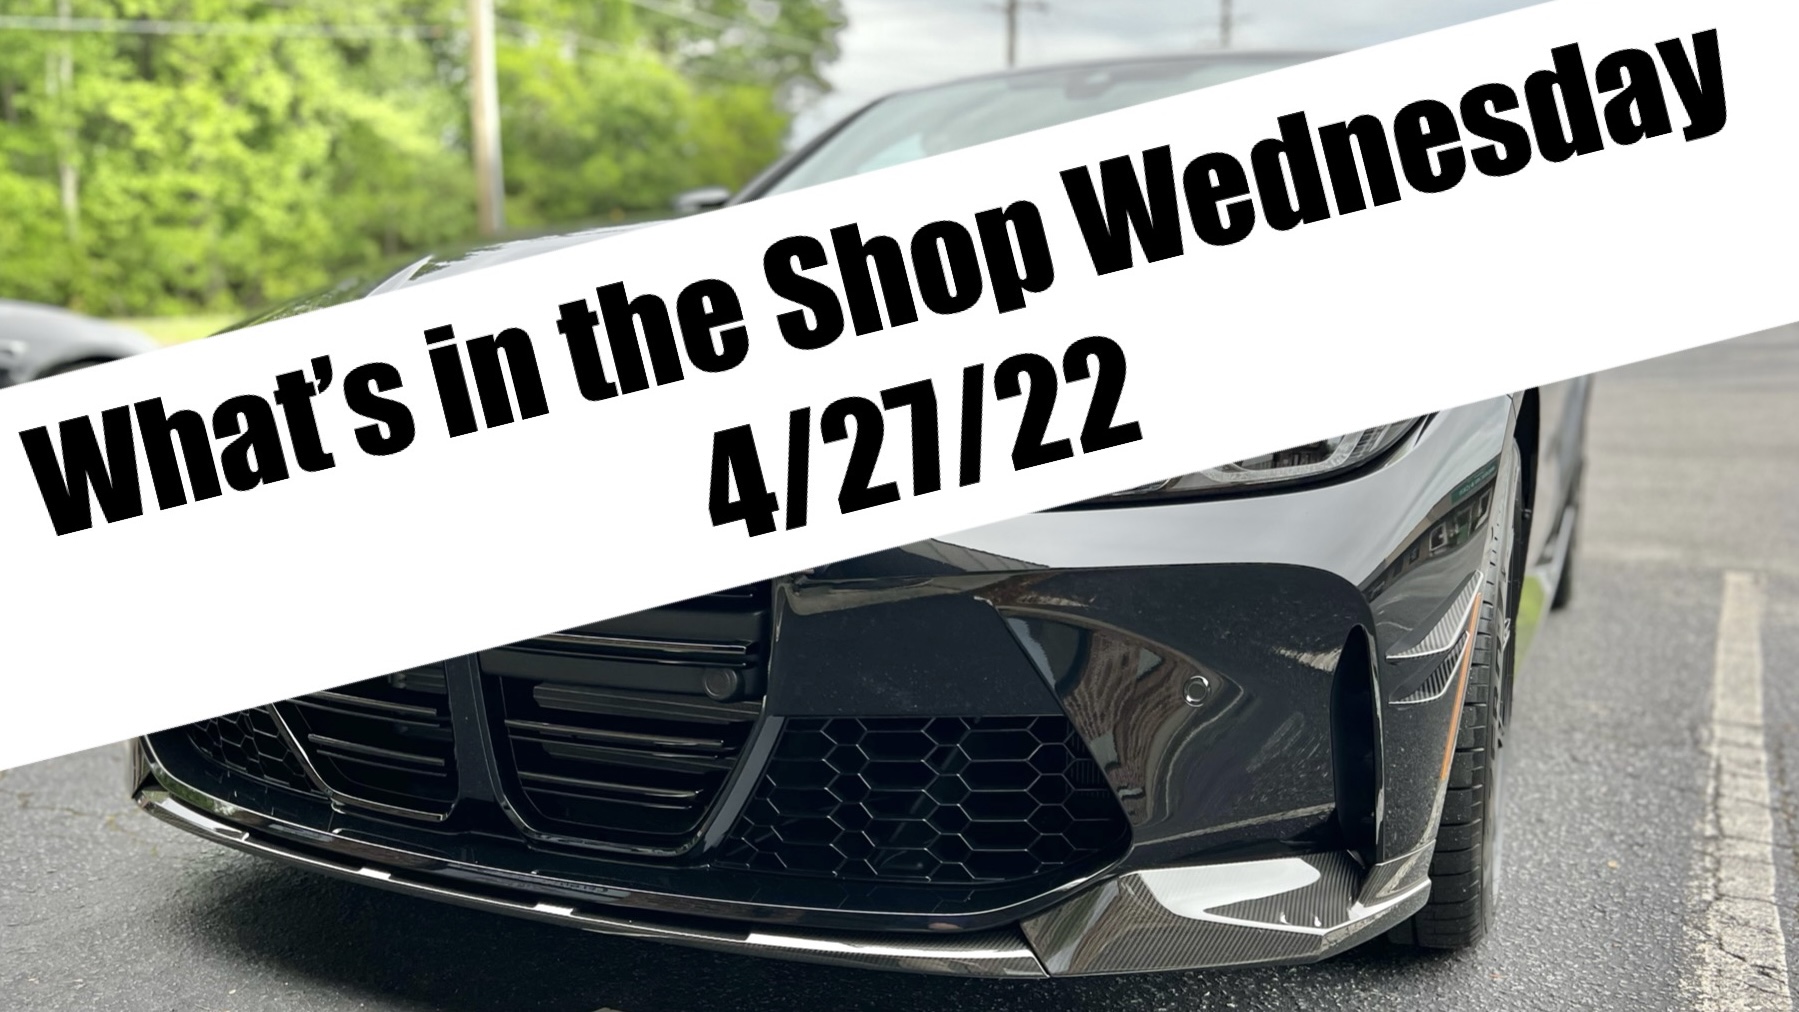 What’s in the Shop Wednesday 4/27/22